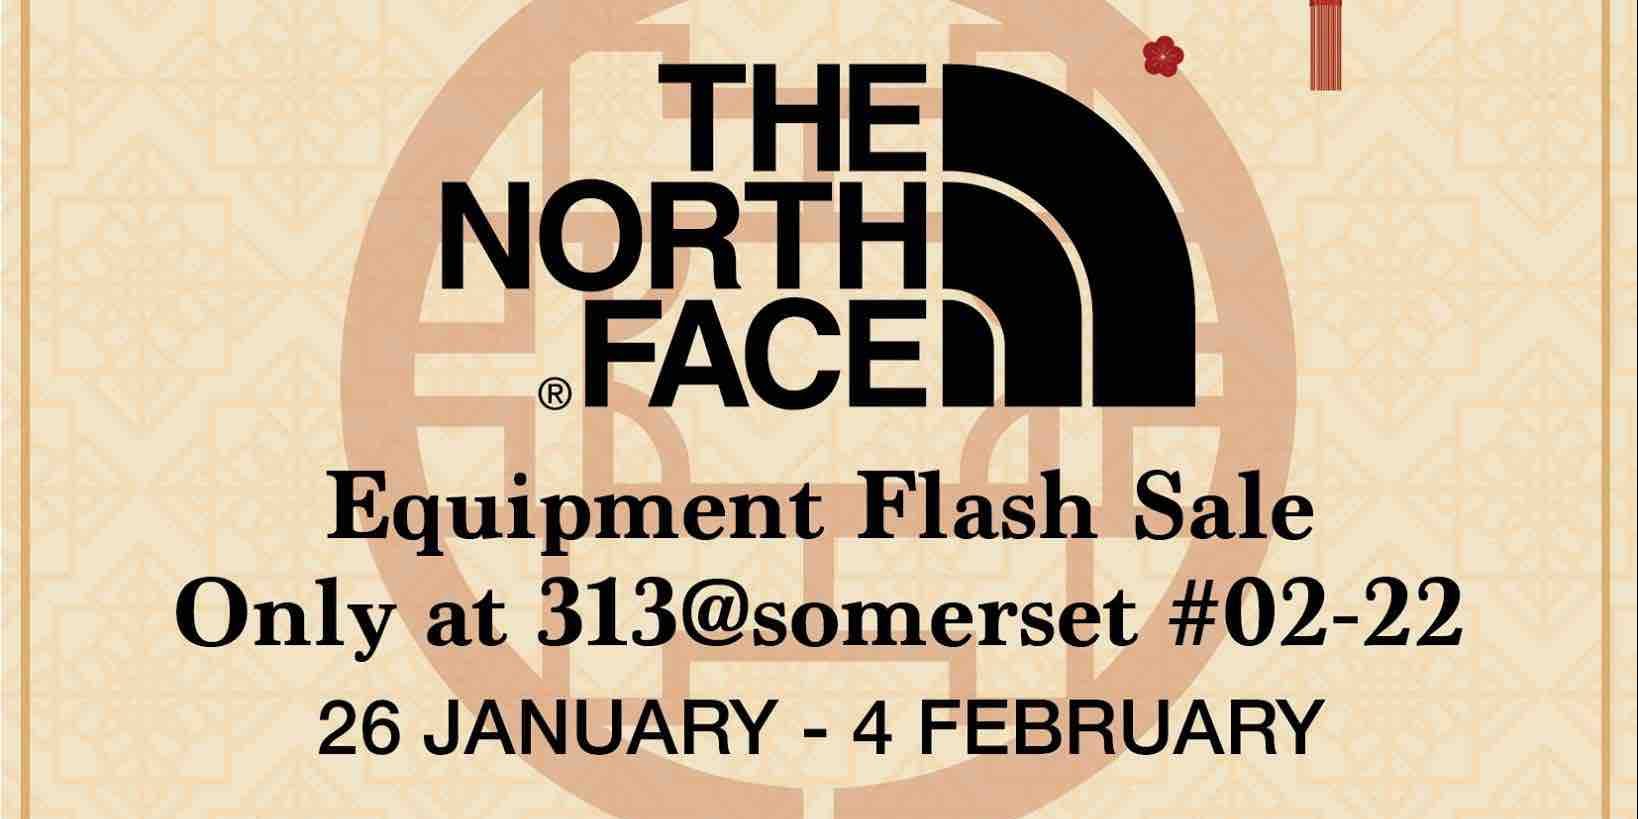 The North Face Singapore 313@somerset Equipment Flash Sale 50% Off ends 4 Feb 2018